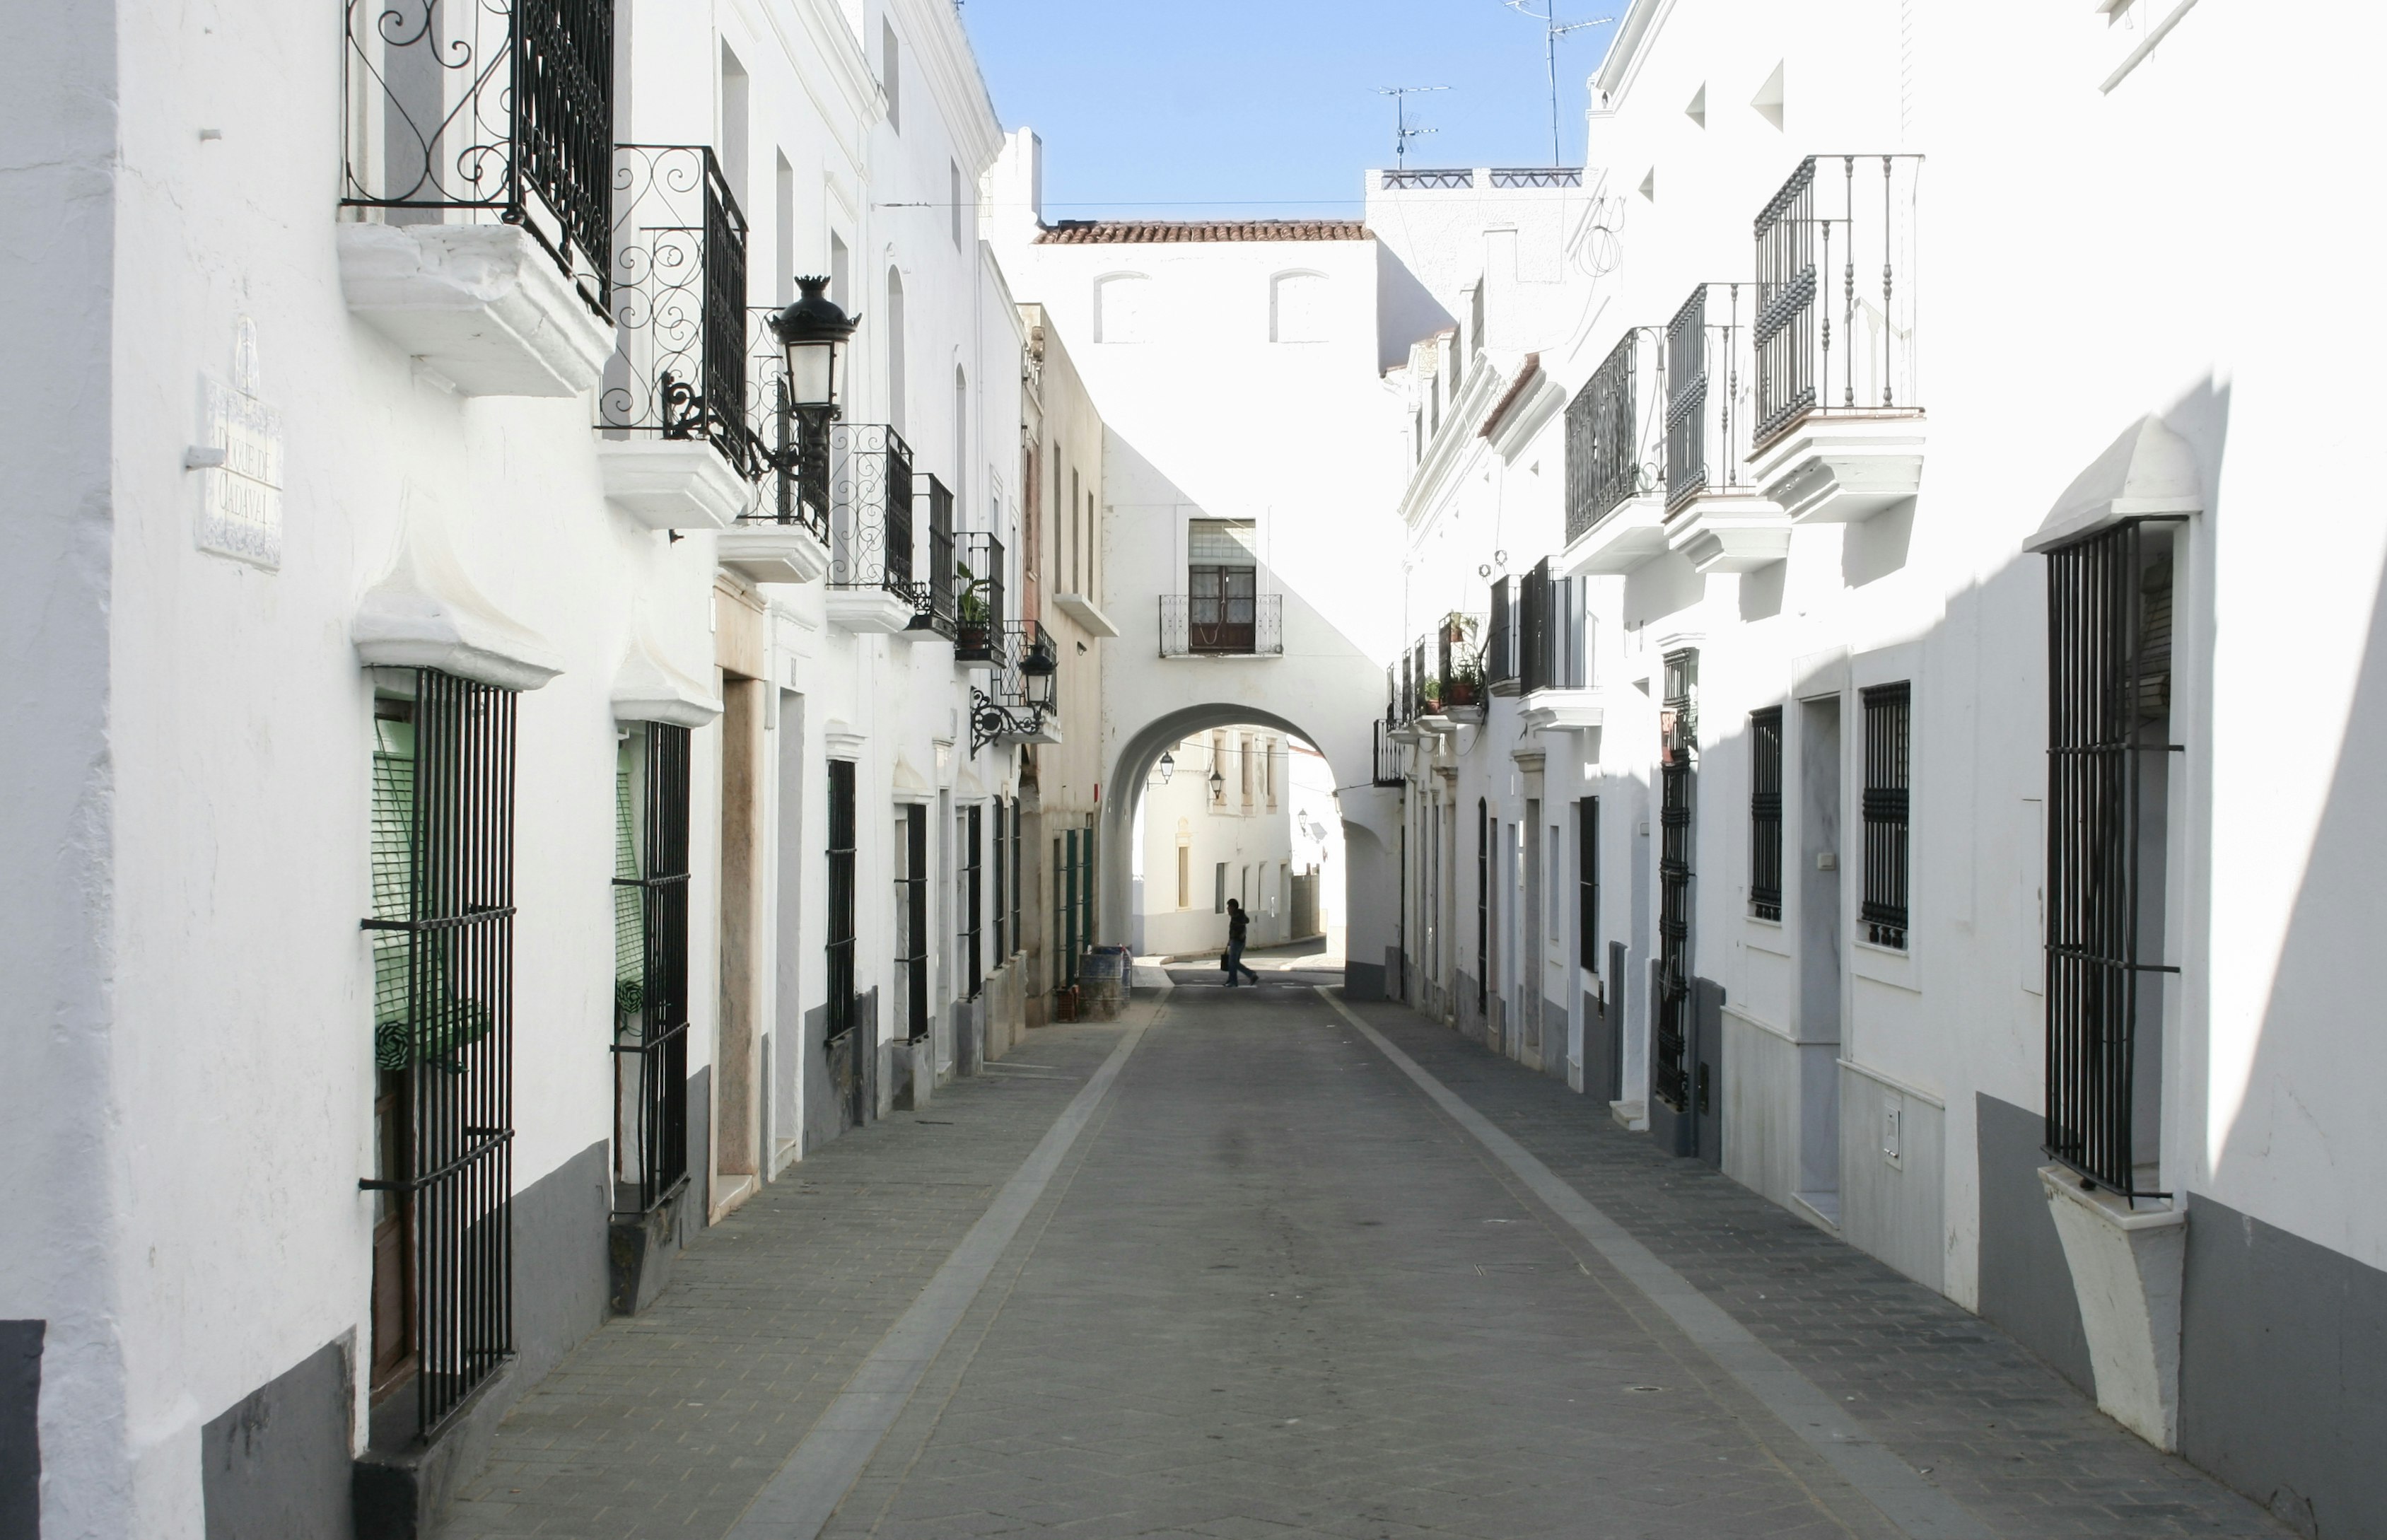 Typical whitewashed houses at village streets of Olivenza, Spain